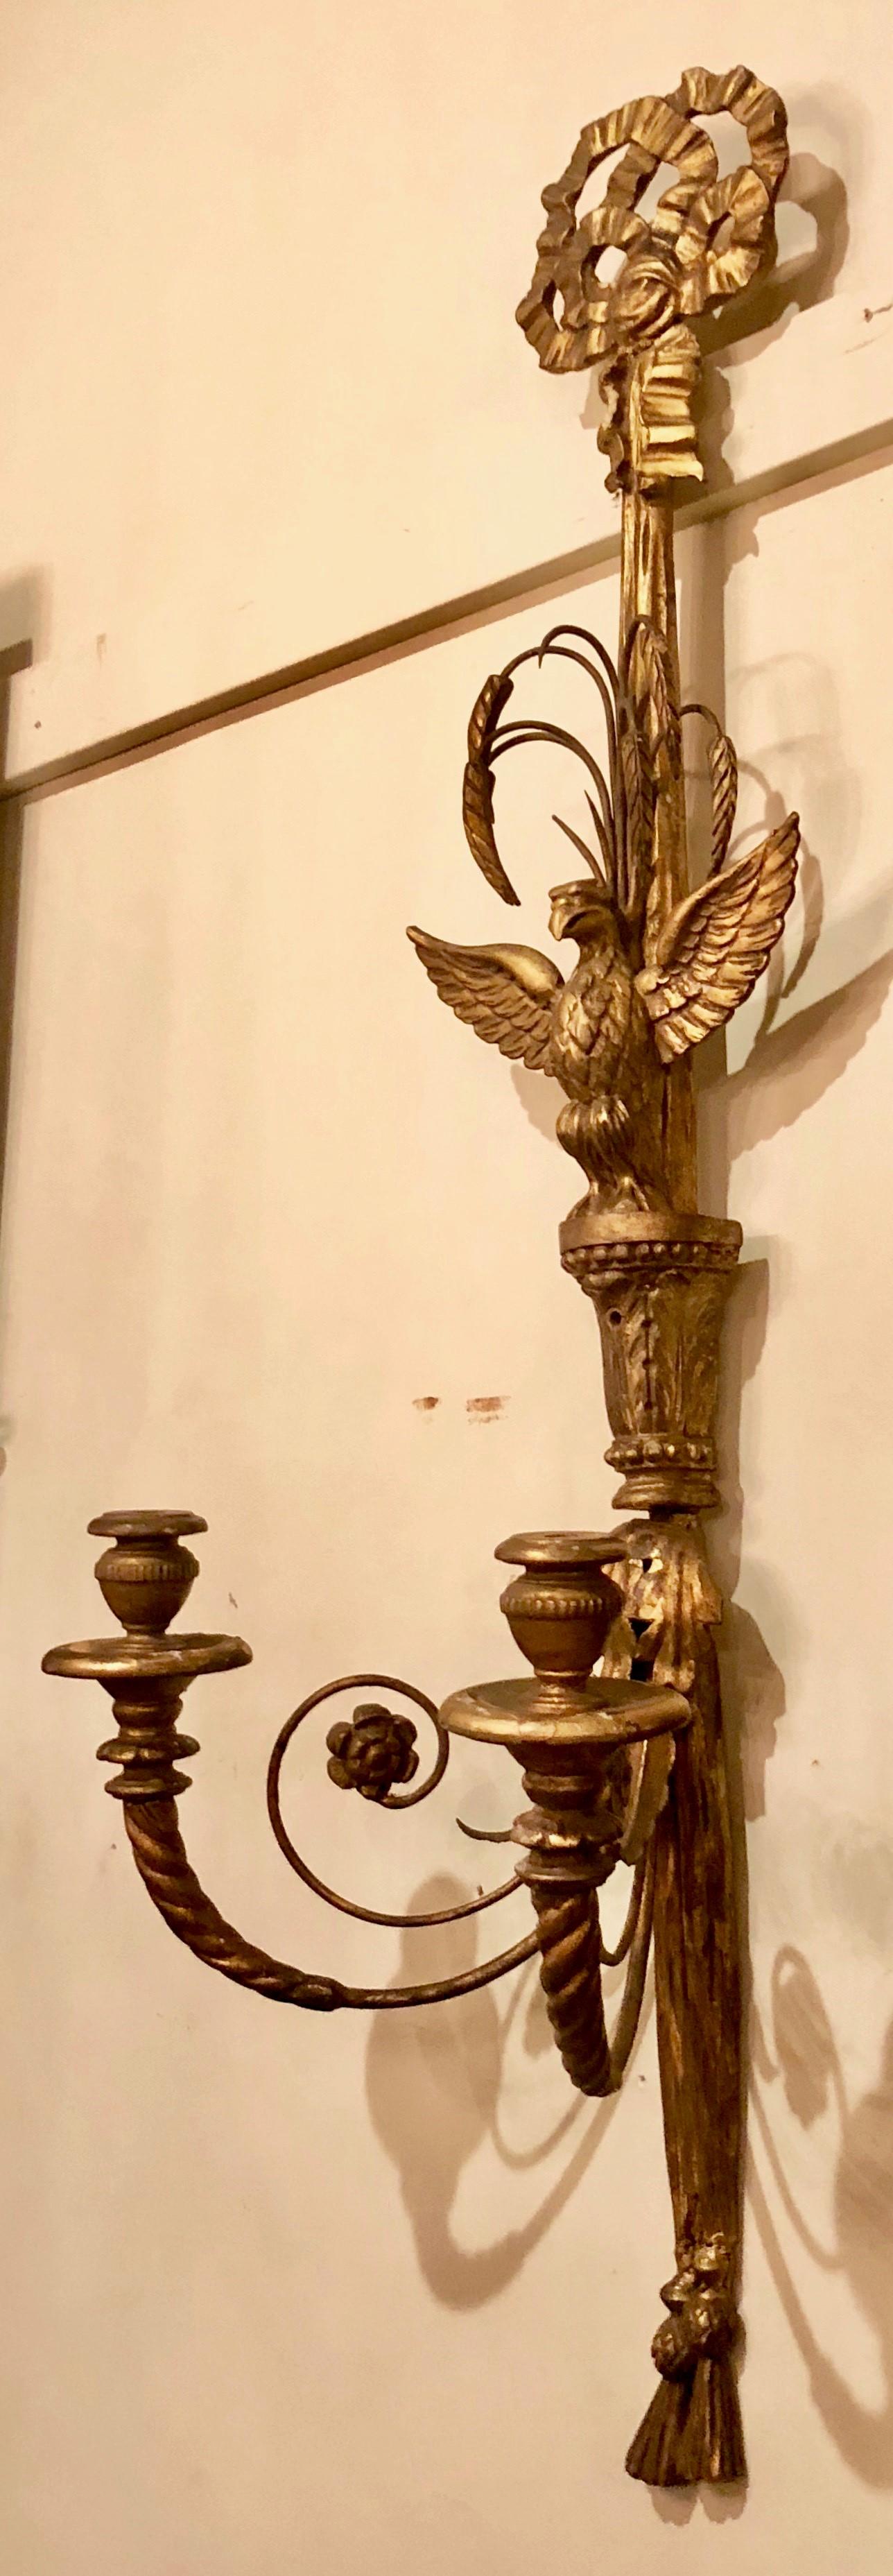 Nicely carved sconces with the eagle figuring prominently on each.